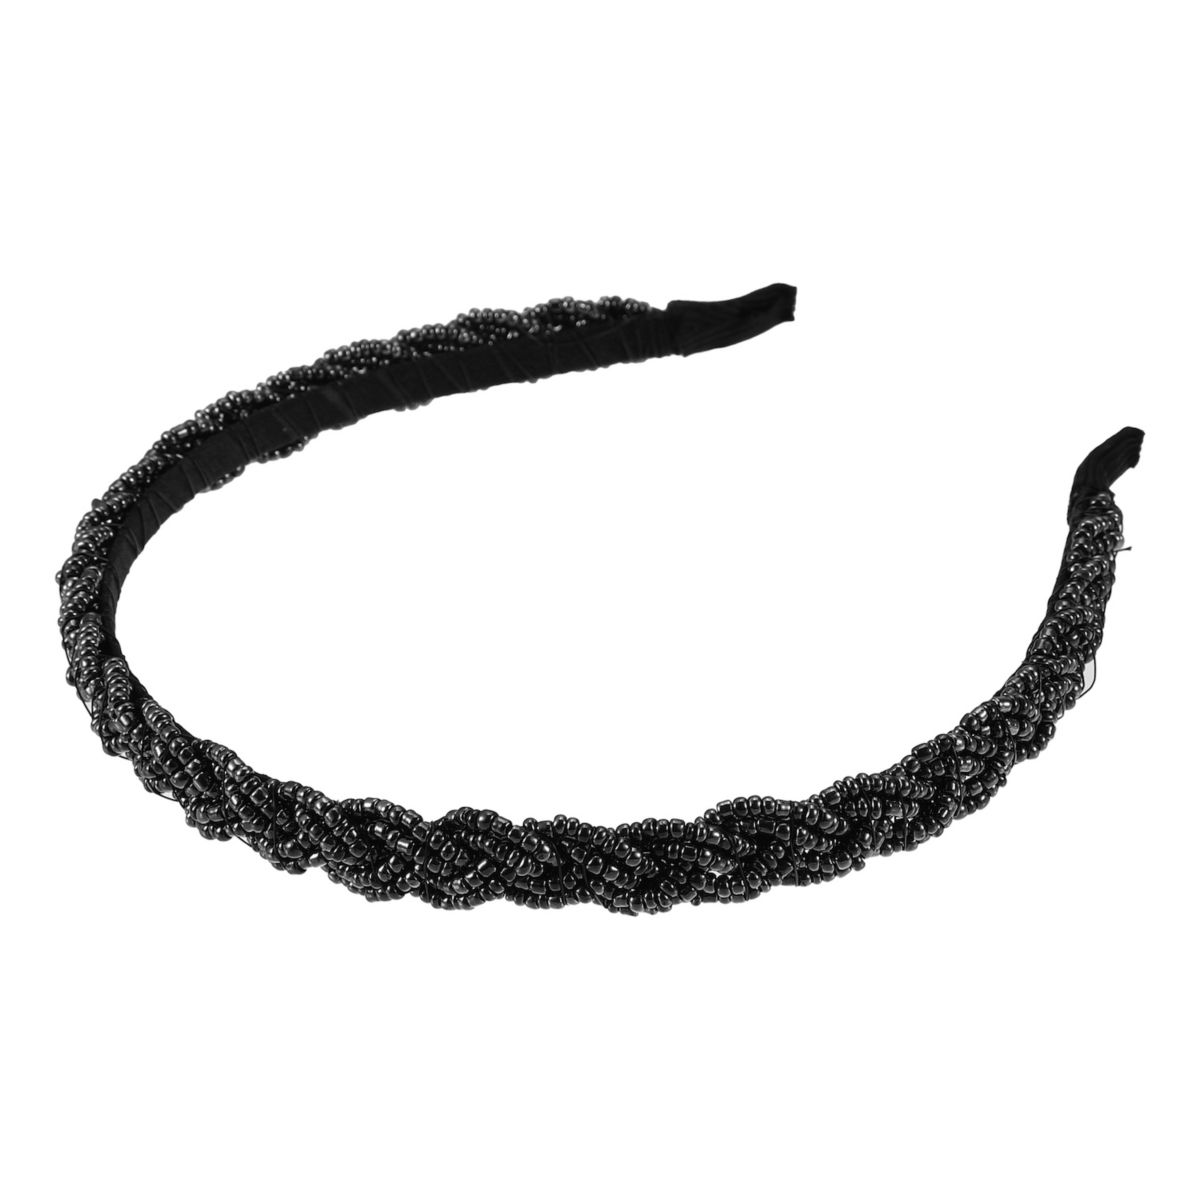 1 Pc Beaded Hair Hoop Hairband for Women 0.43 Inch Wide Unique Bargains